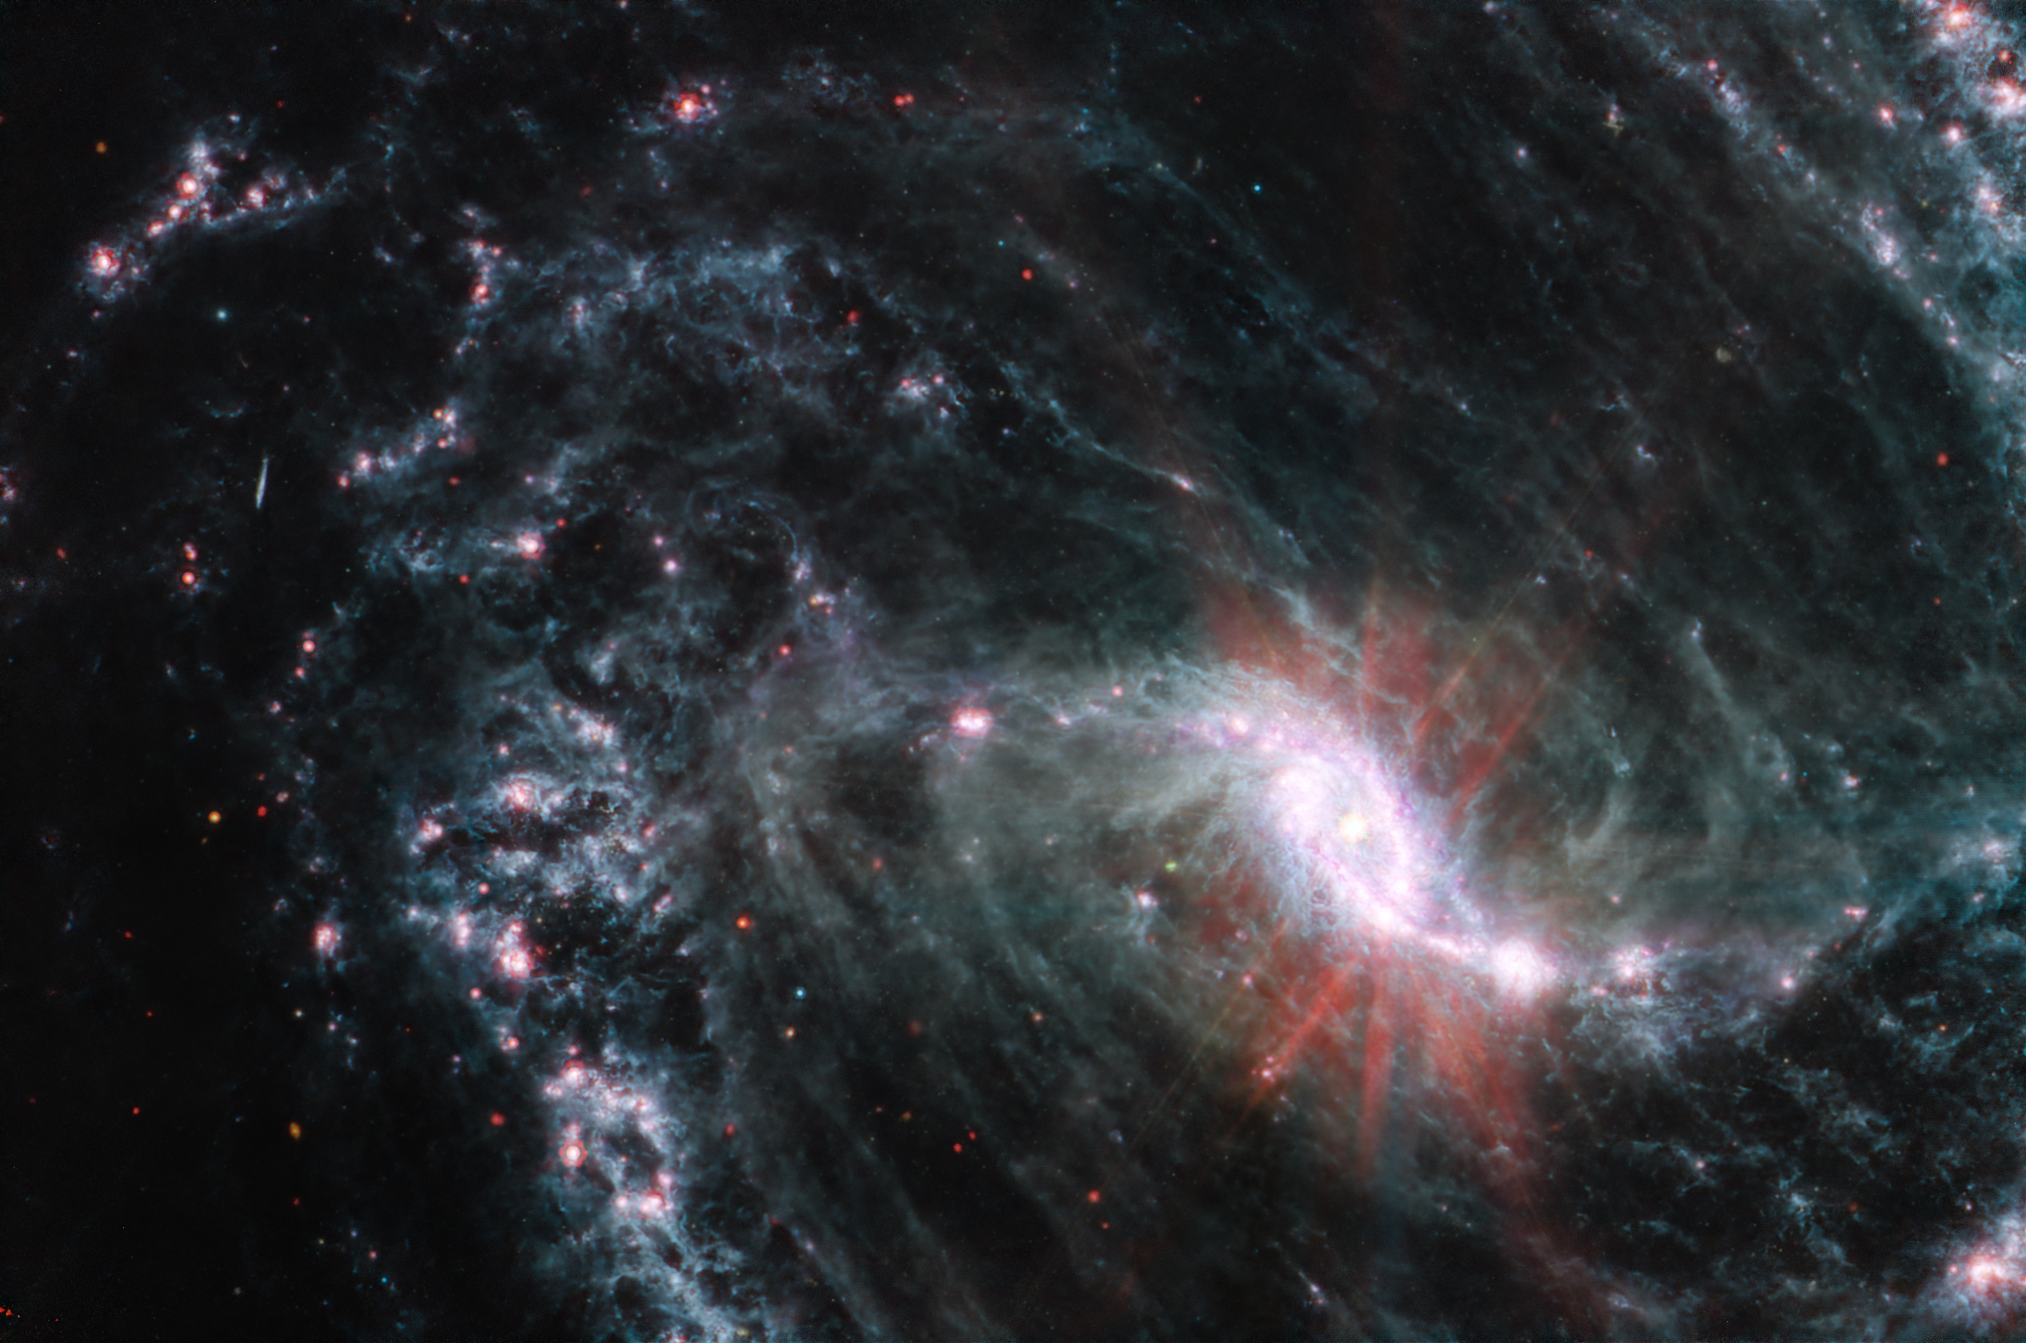 Close-up of a wispy spiral galaxy on a black background. It features a glowing, light pink core in an elongated oval shape. Red streaks appear to emanate out of the core.